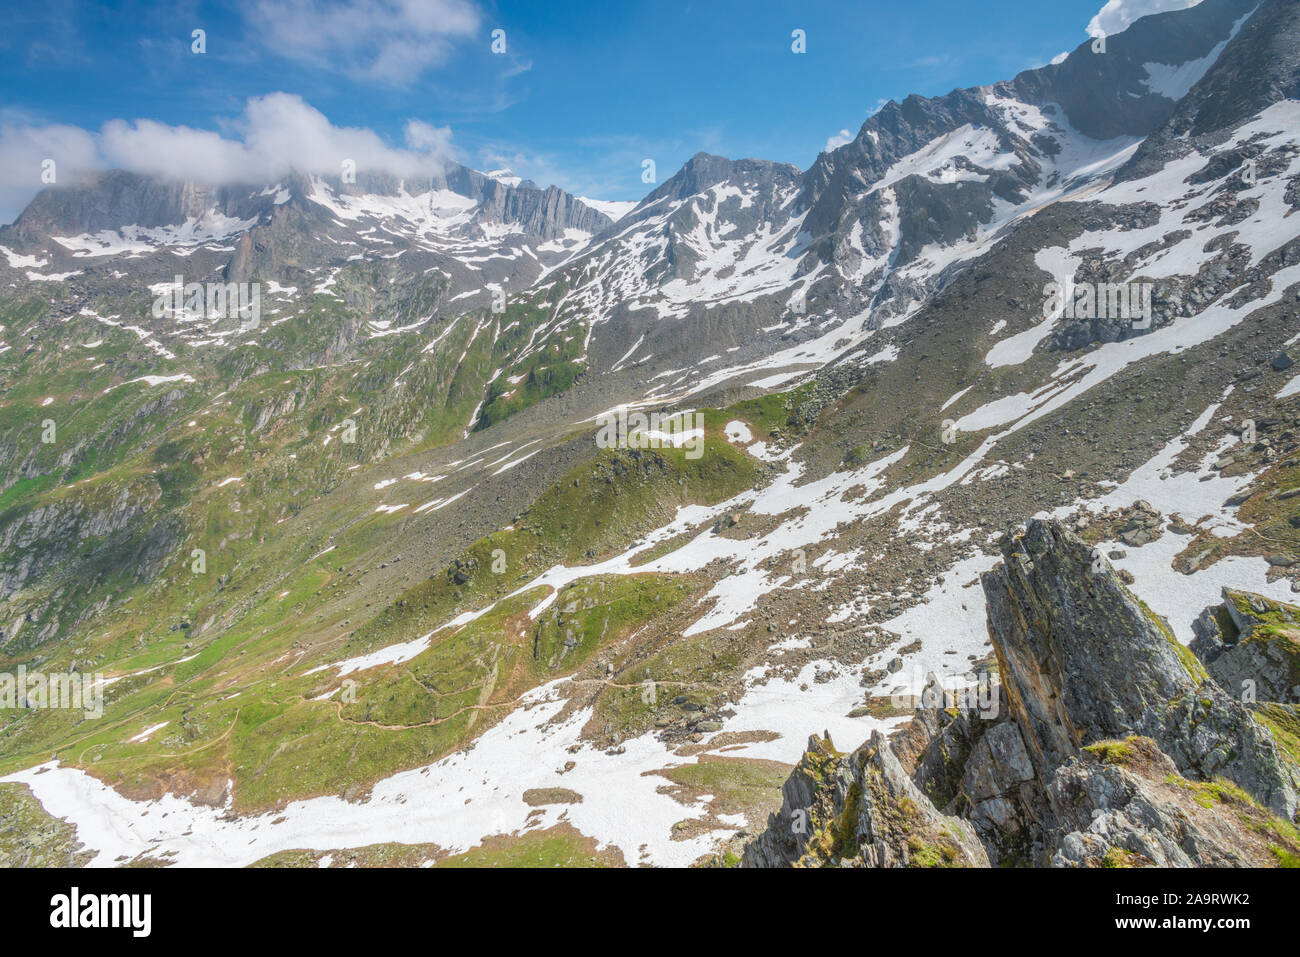 Snow patches on the slopes of the Alps between the Italian and Austrian border. Lingering snow on the mountains, zig-zagging trail dropping below. Stock Photo